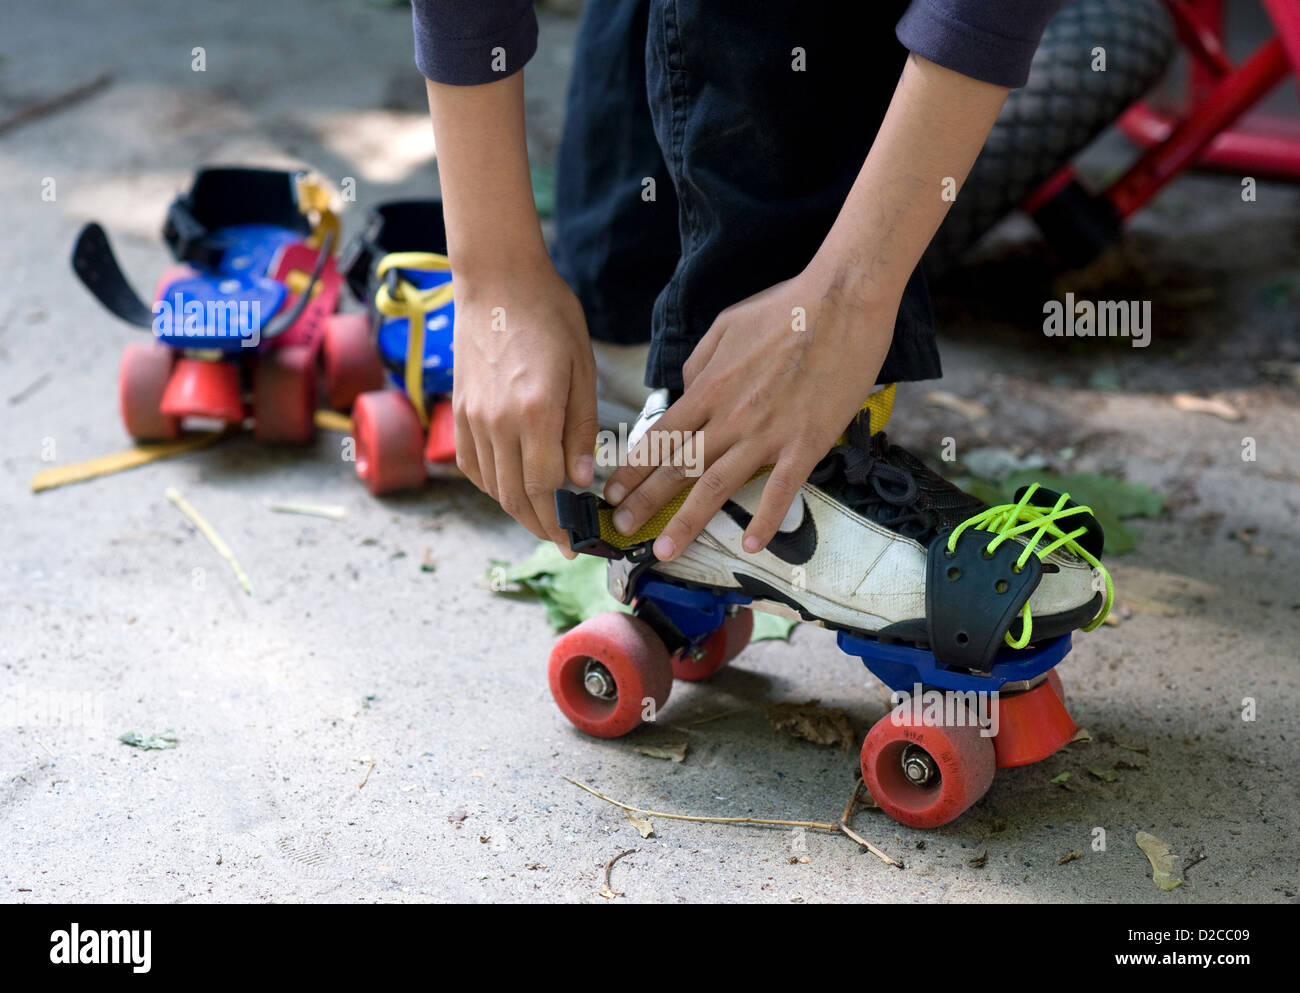 Berlin, Germany, a boy strapped on his skates Stock Photo